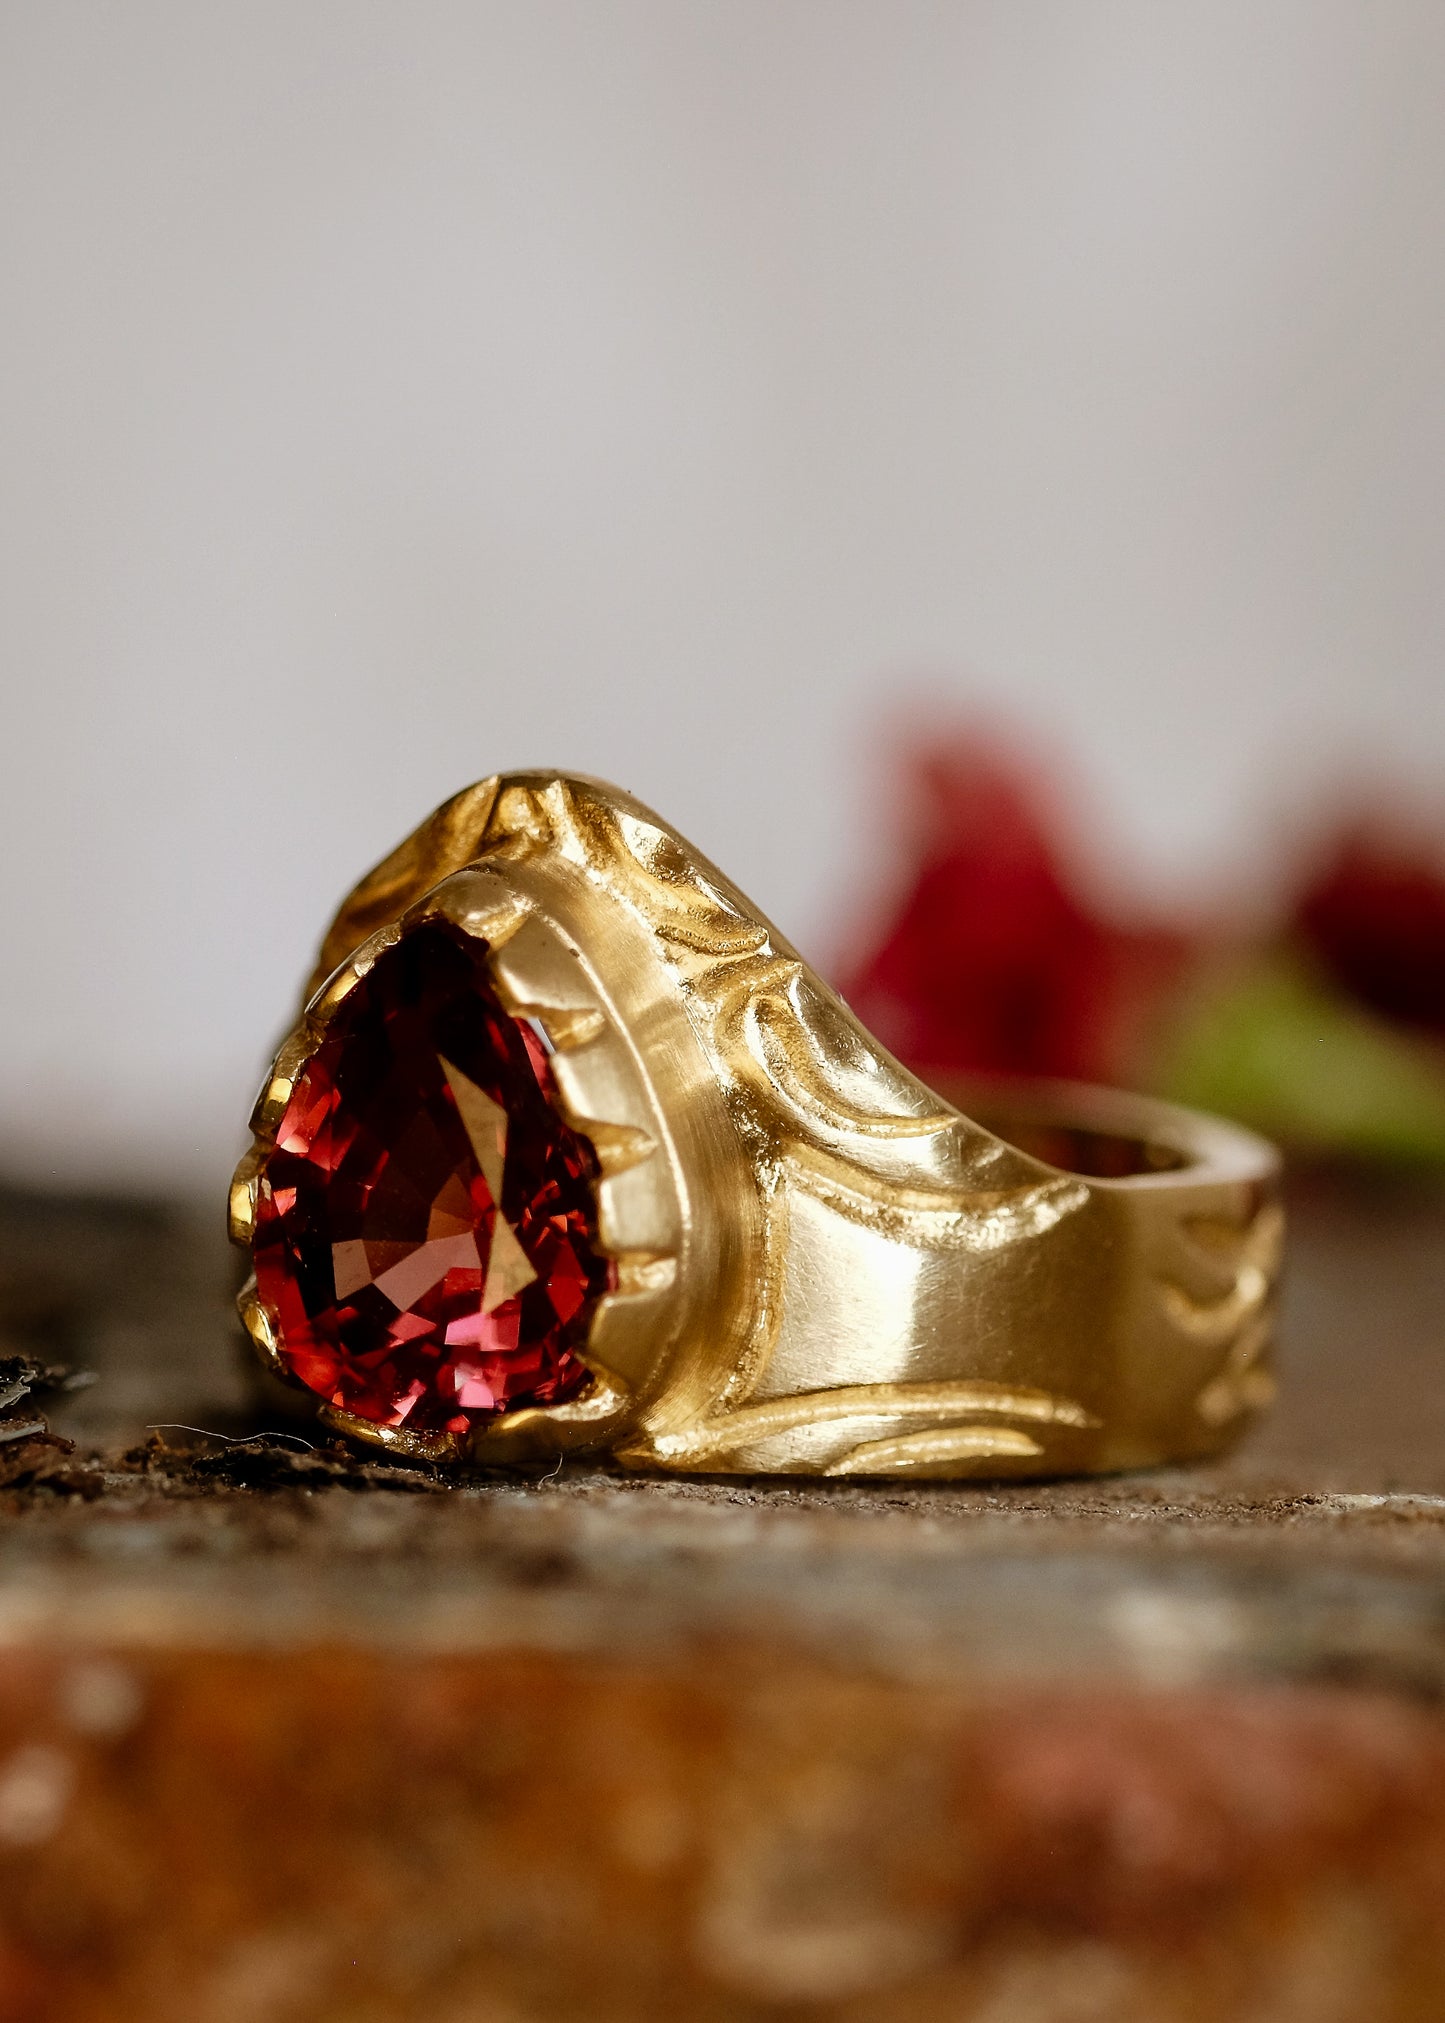 A study in strength and courage. The Valor ring relishes its prominence, the high arch shape a nod to the architectural element that can bear the unimaginable. A large reddish zircon nestles into the surrounding gold that has been hand-carved to showcase its beauty.